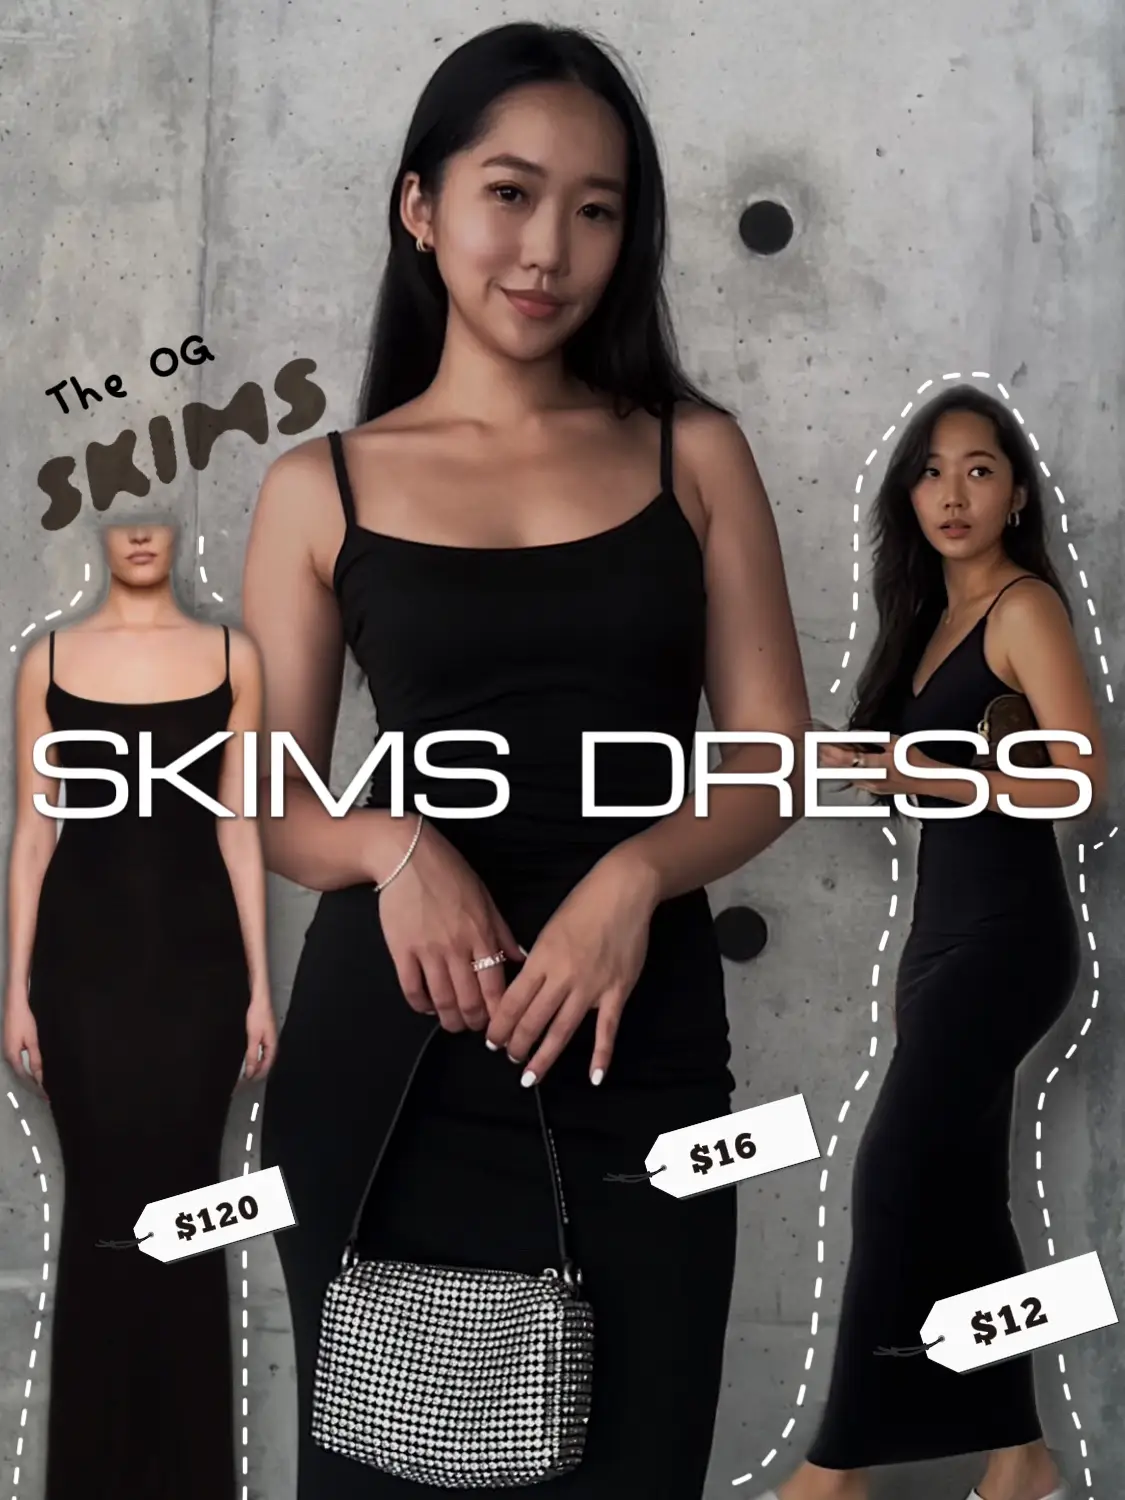 The BEST Zara & Skims dupes on Aliexpress & Shein. Trying Viral